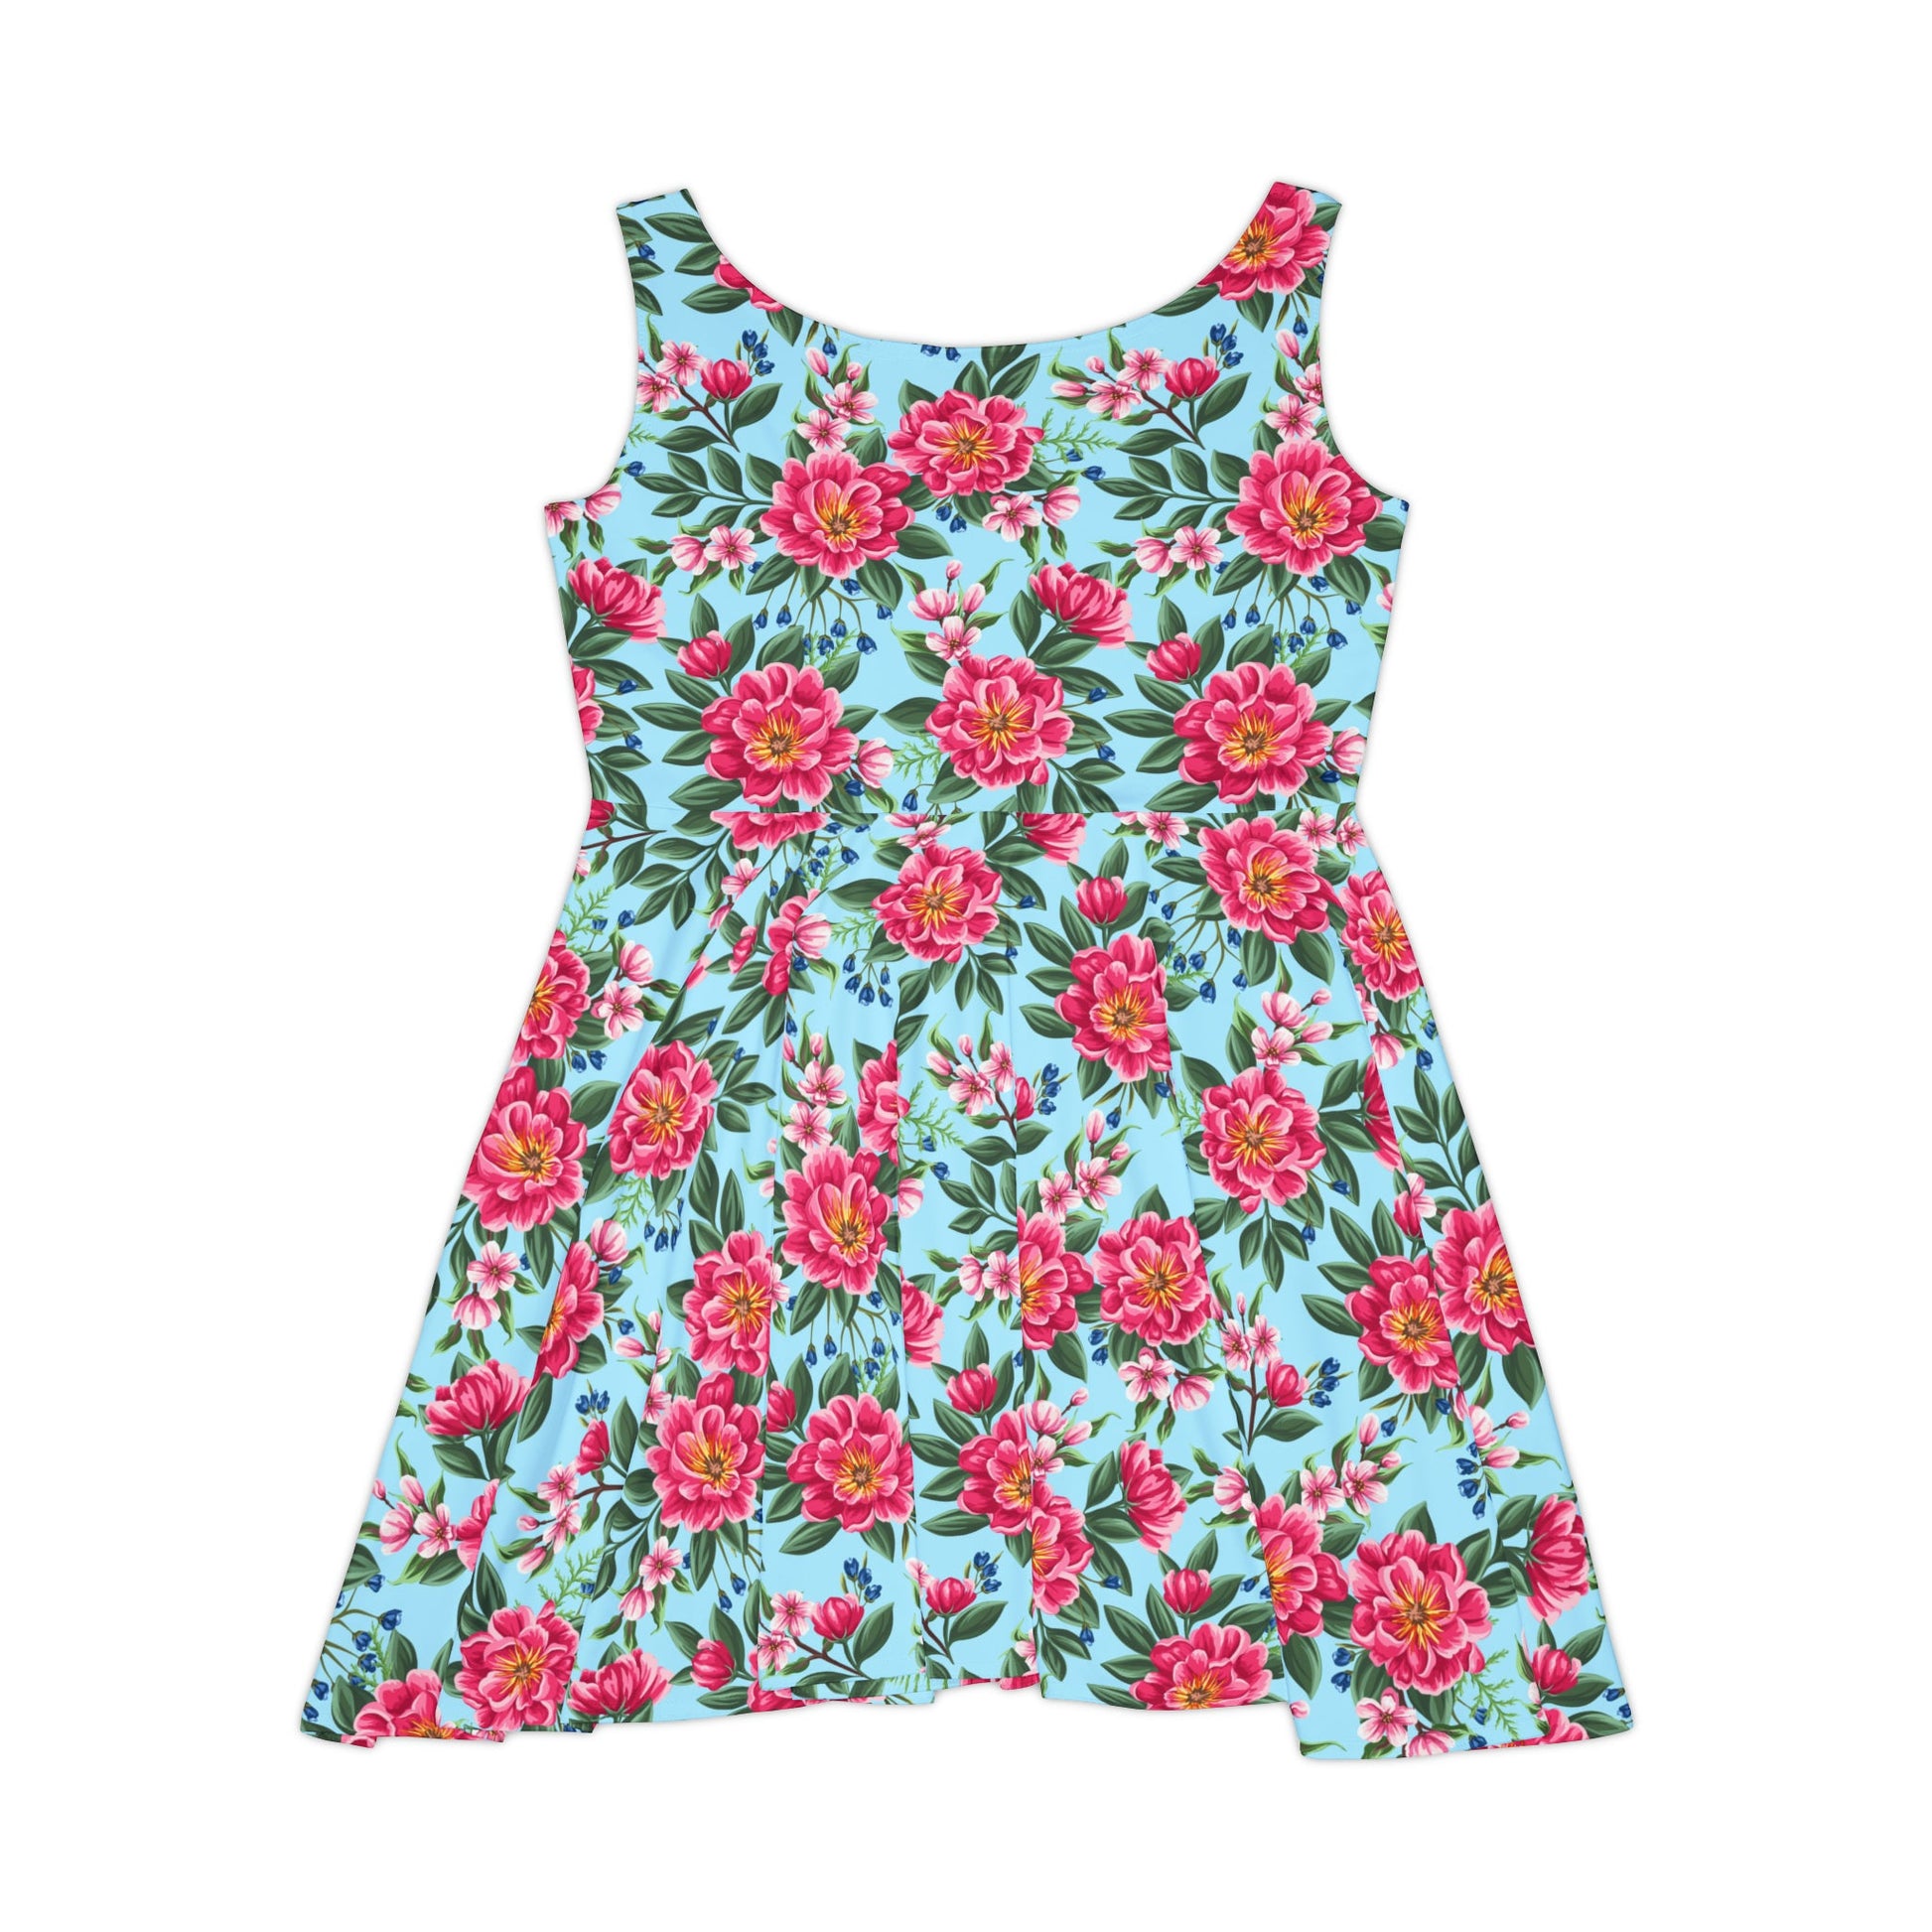 All Over Prints - Women's Skater Dress Sea Of Peonies Teal Background Pink And Yellow